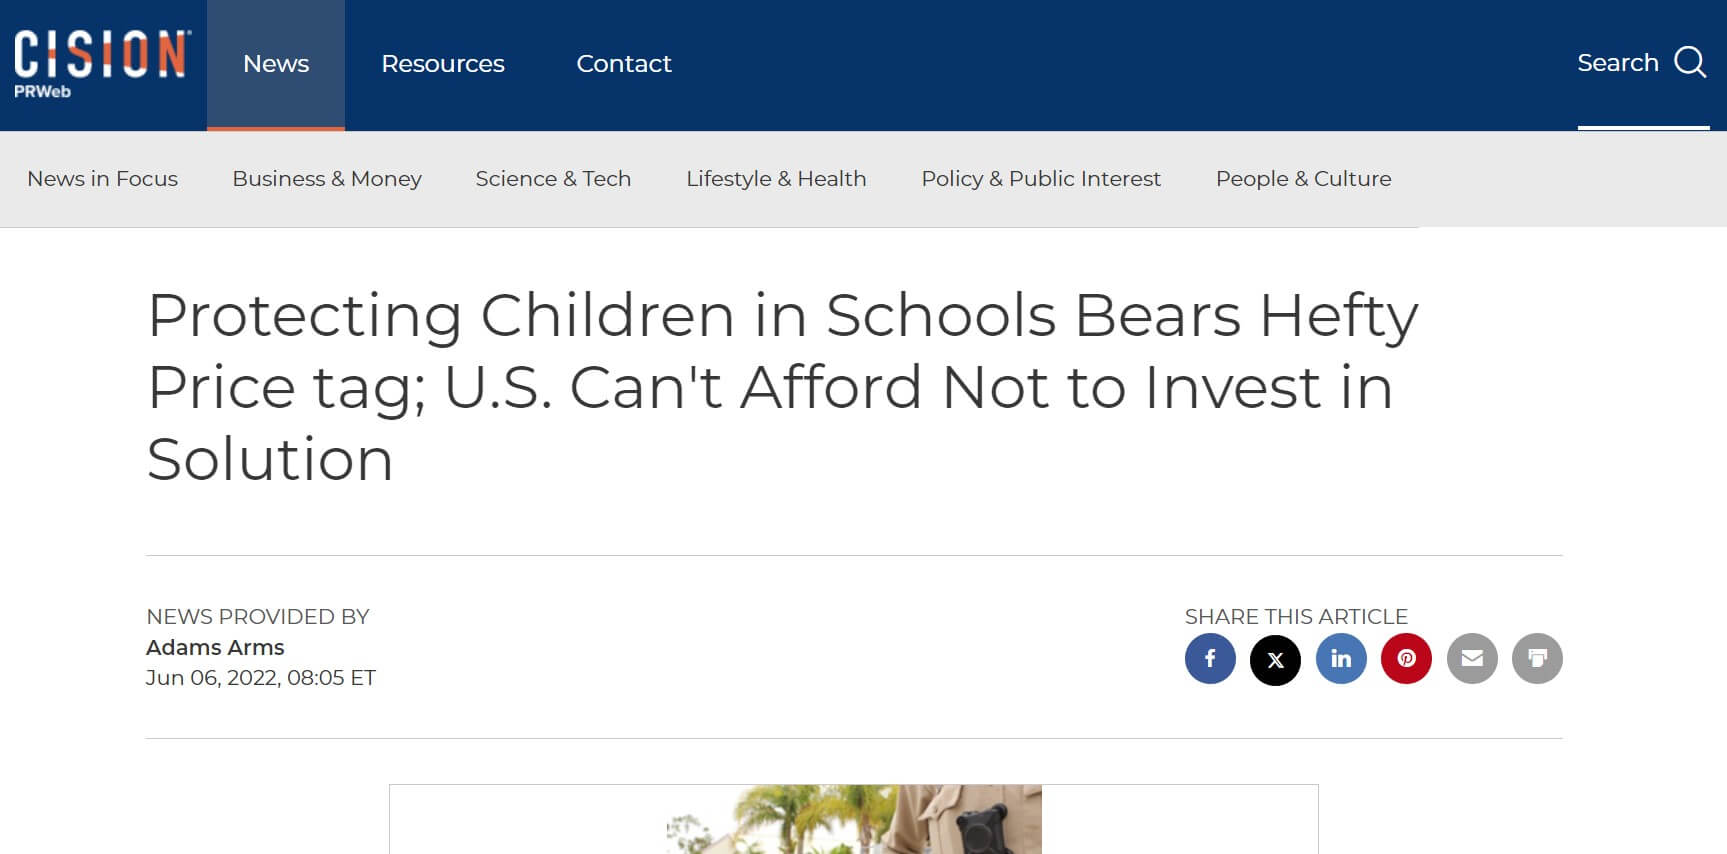 Cision News article: " Protecting Children in Schools Bears Hefty Price tag; U.S. Can't Afford Not to Invest in Solution